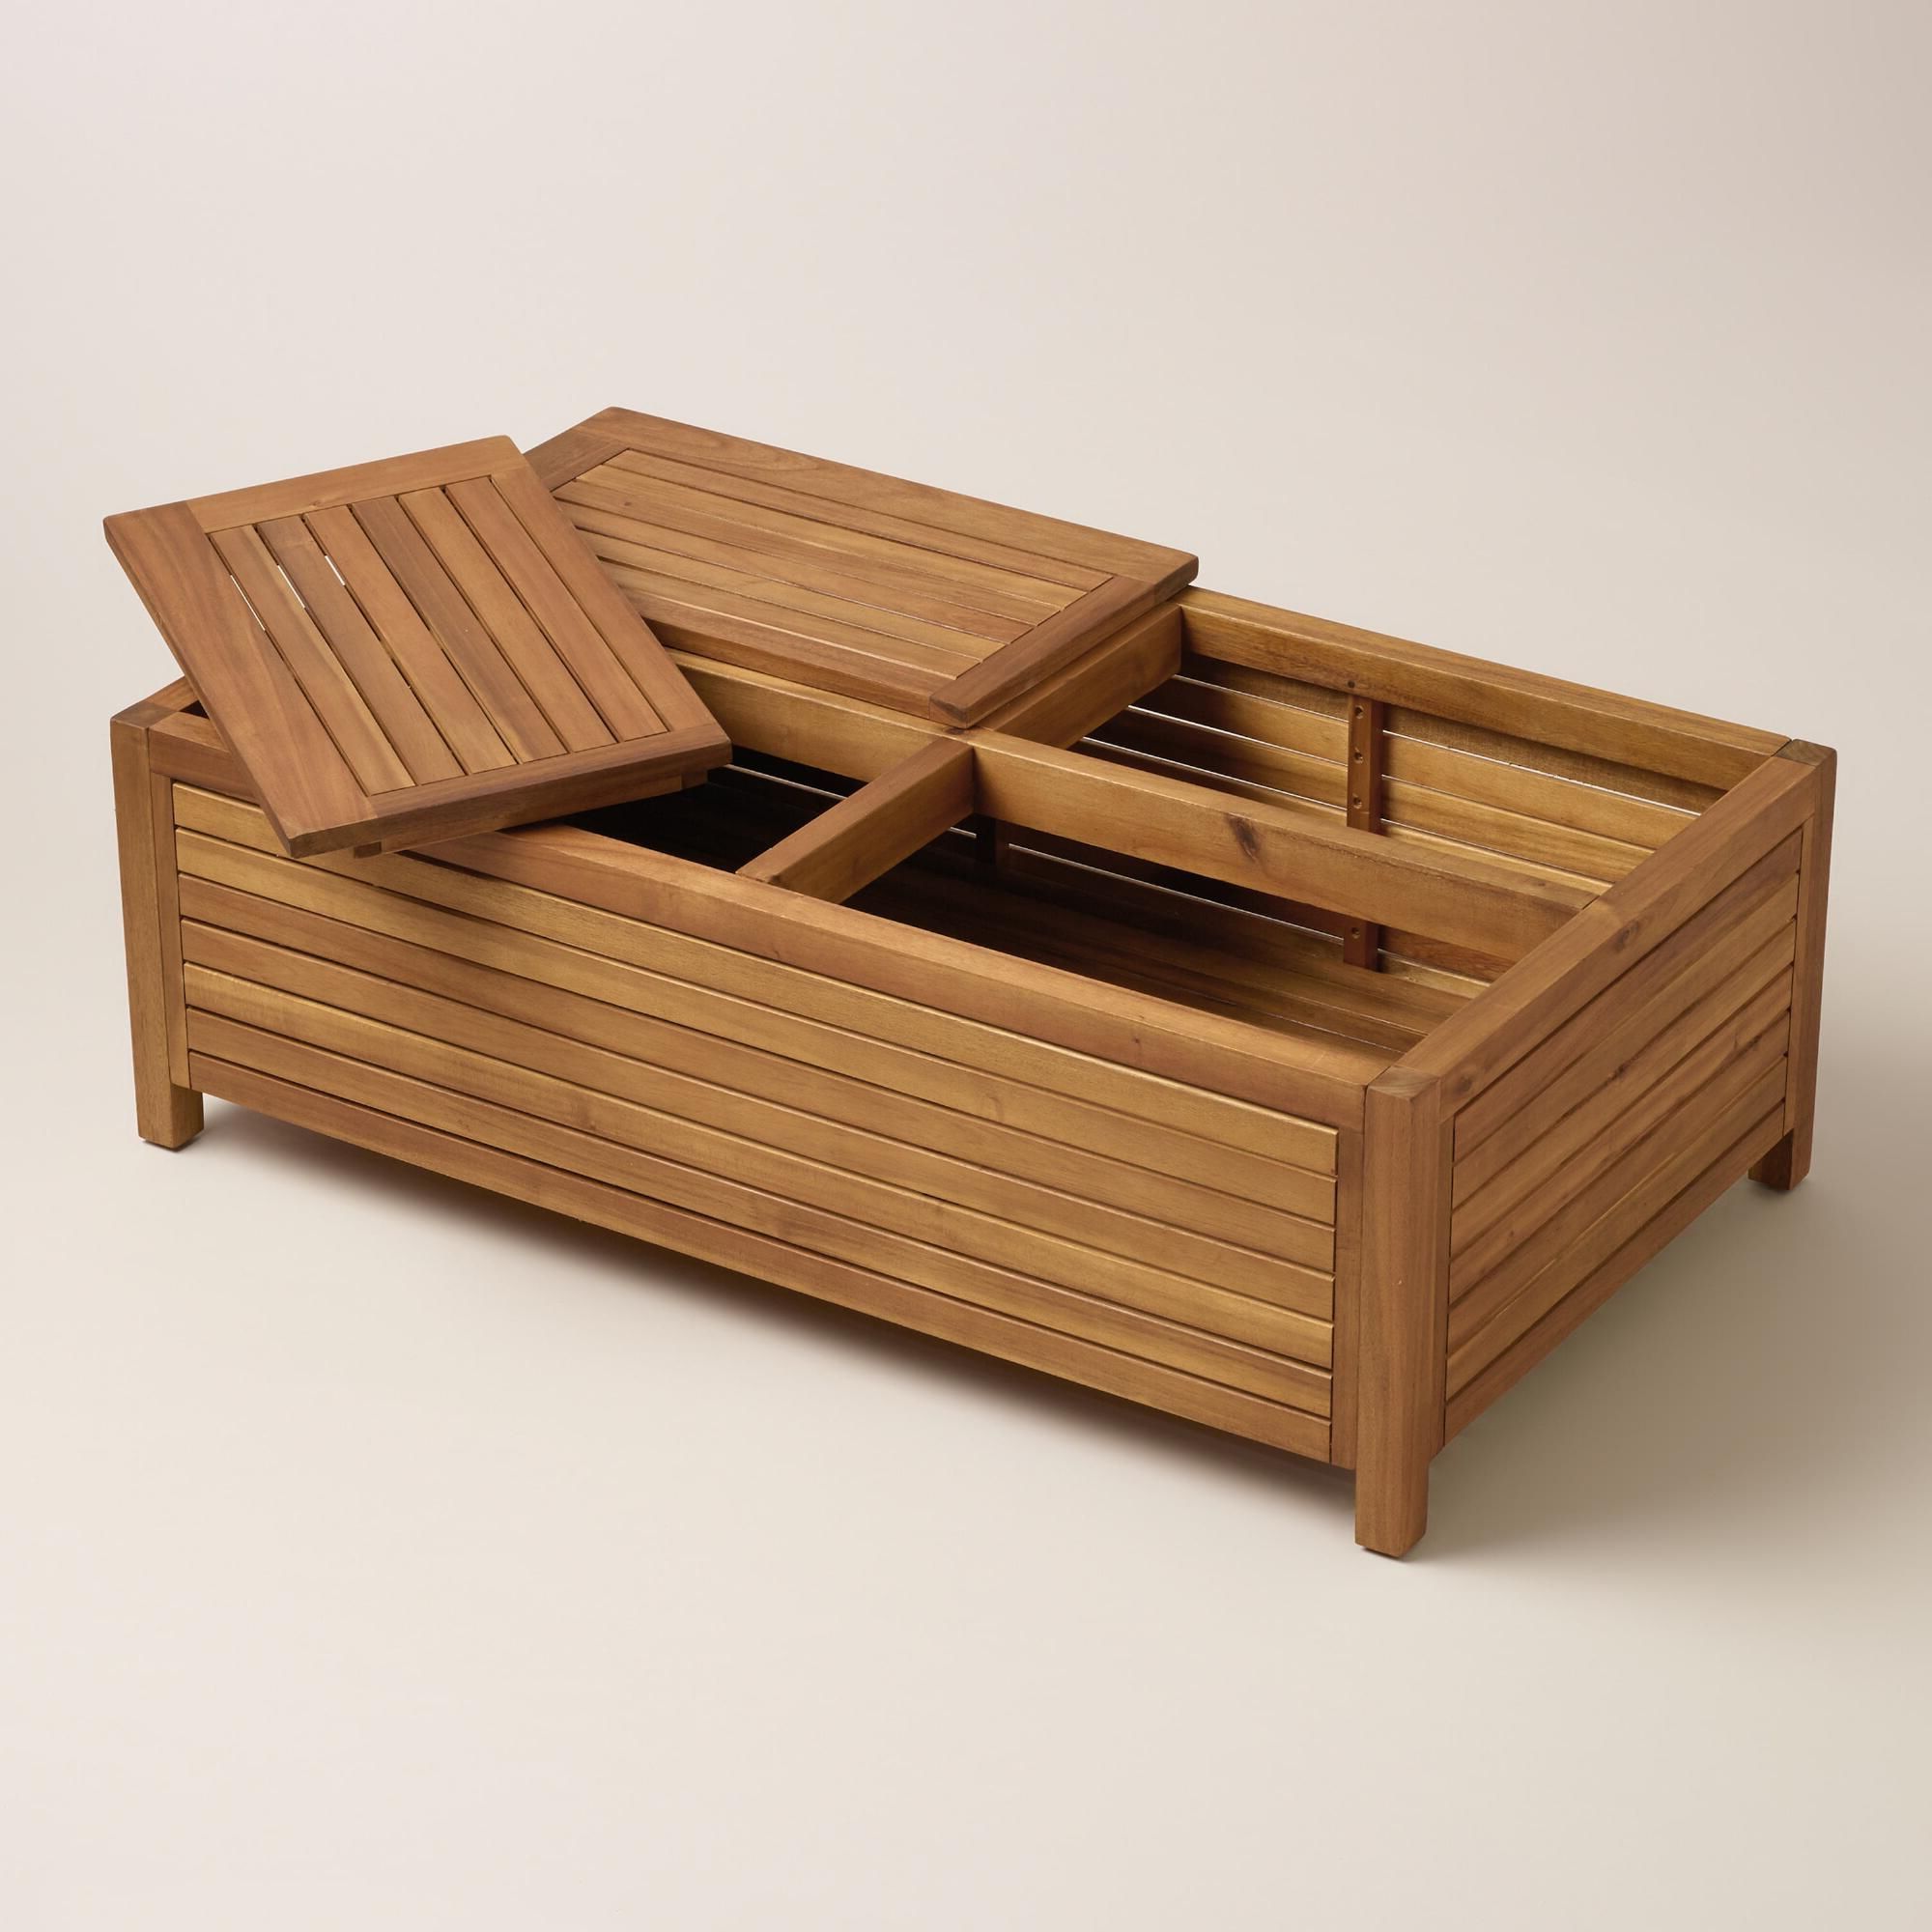 Wood Praiano Outdoor Storage Coffee Table From @worldmarket – A Great Pertaining To 2020 Outdoor Coffee Tables With Storage (View 6 of 15)